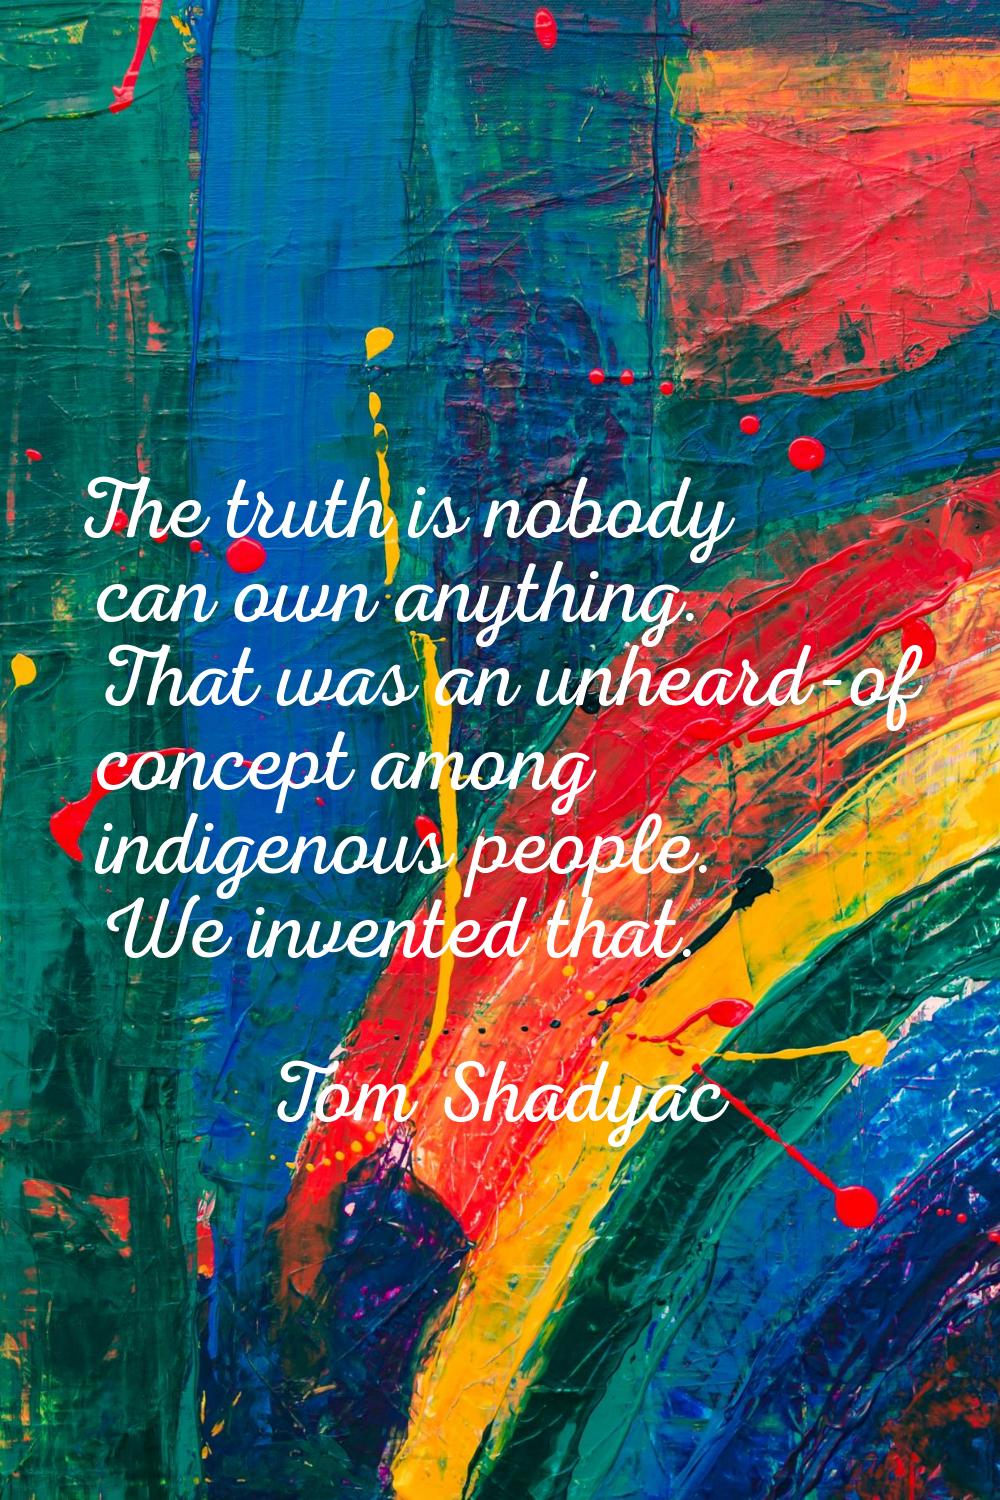 The truth is nobody can own anything. That was an unheard-of concept among indigenous people. We in